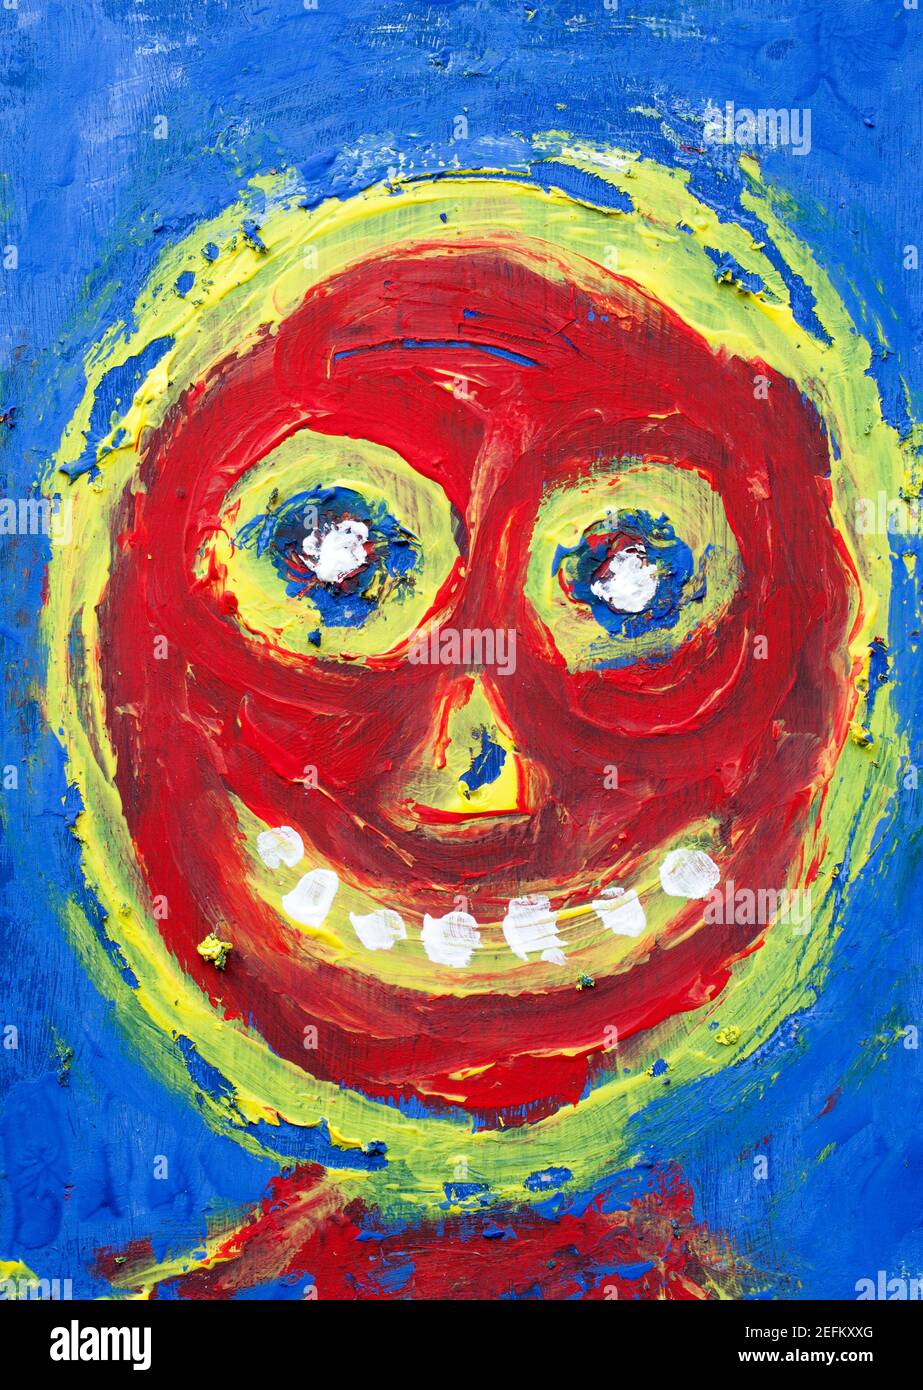 Outsider Art Painting of Happy Face Stock Photo